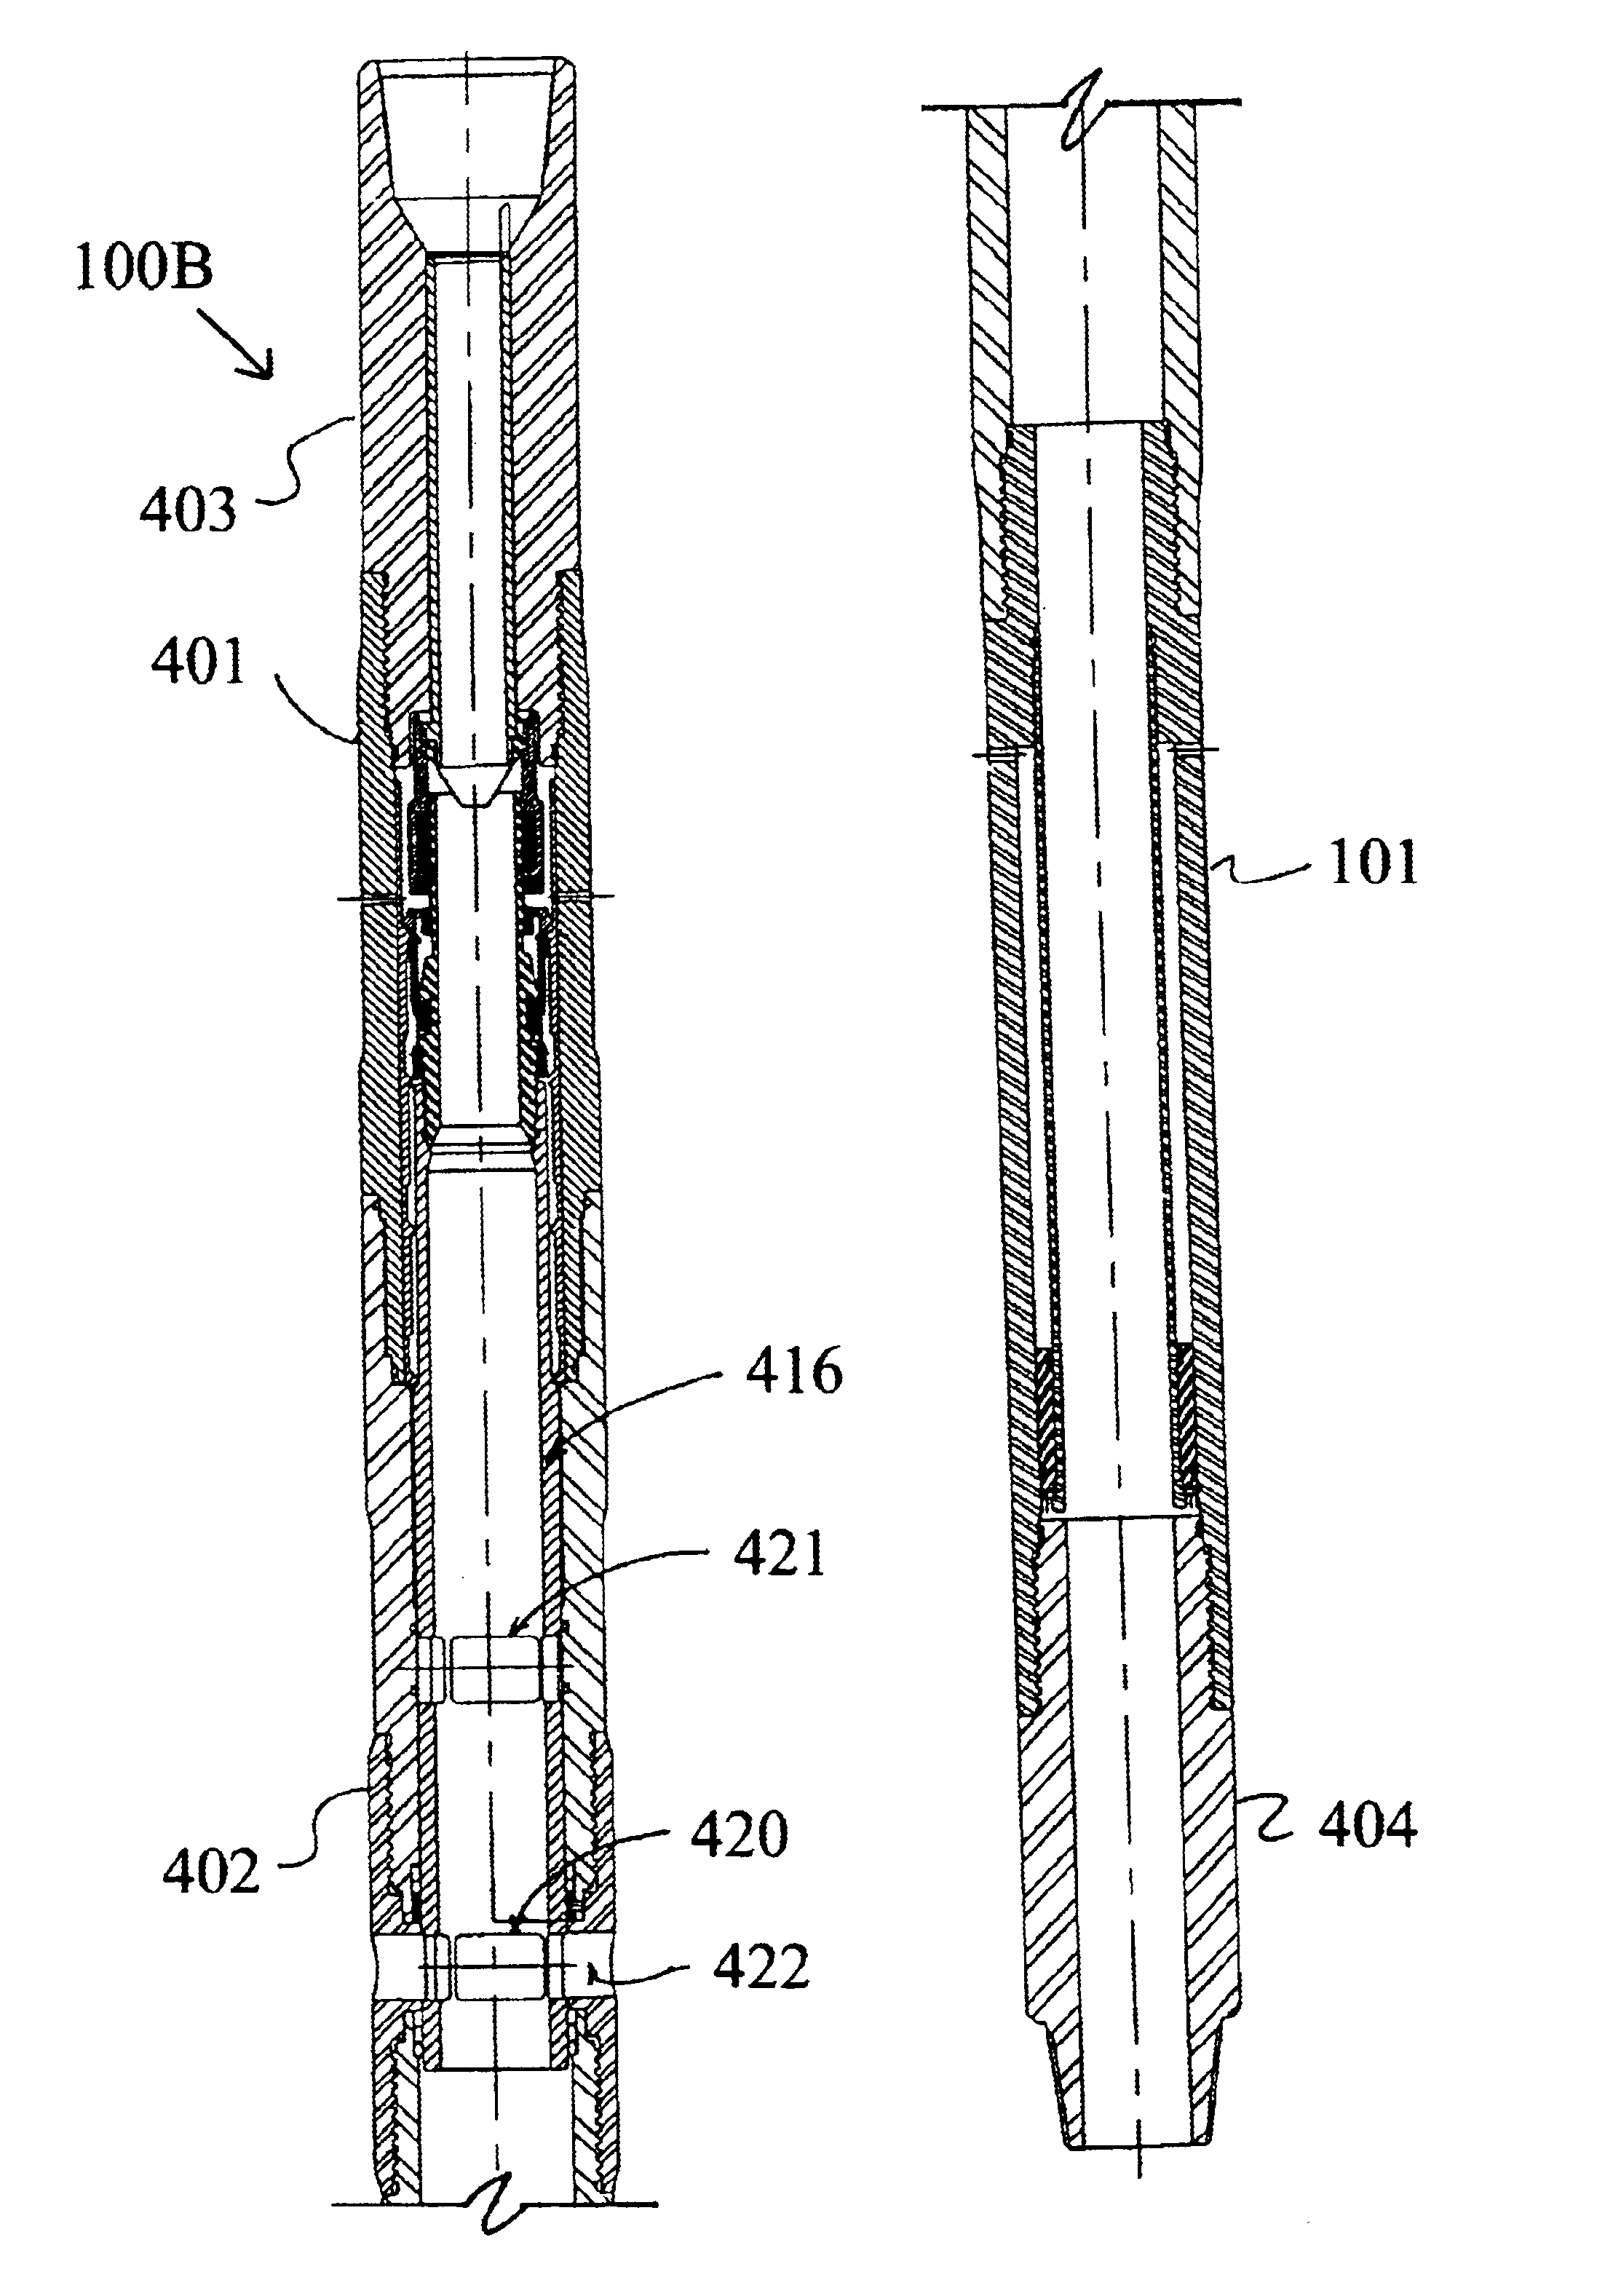 Surge pressure reduction apparatus with volume compensation sub and method for use